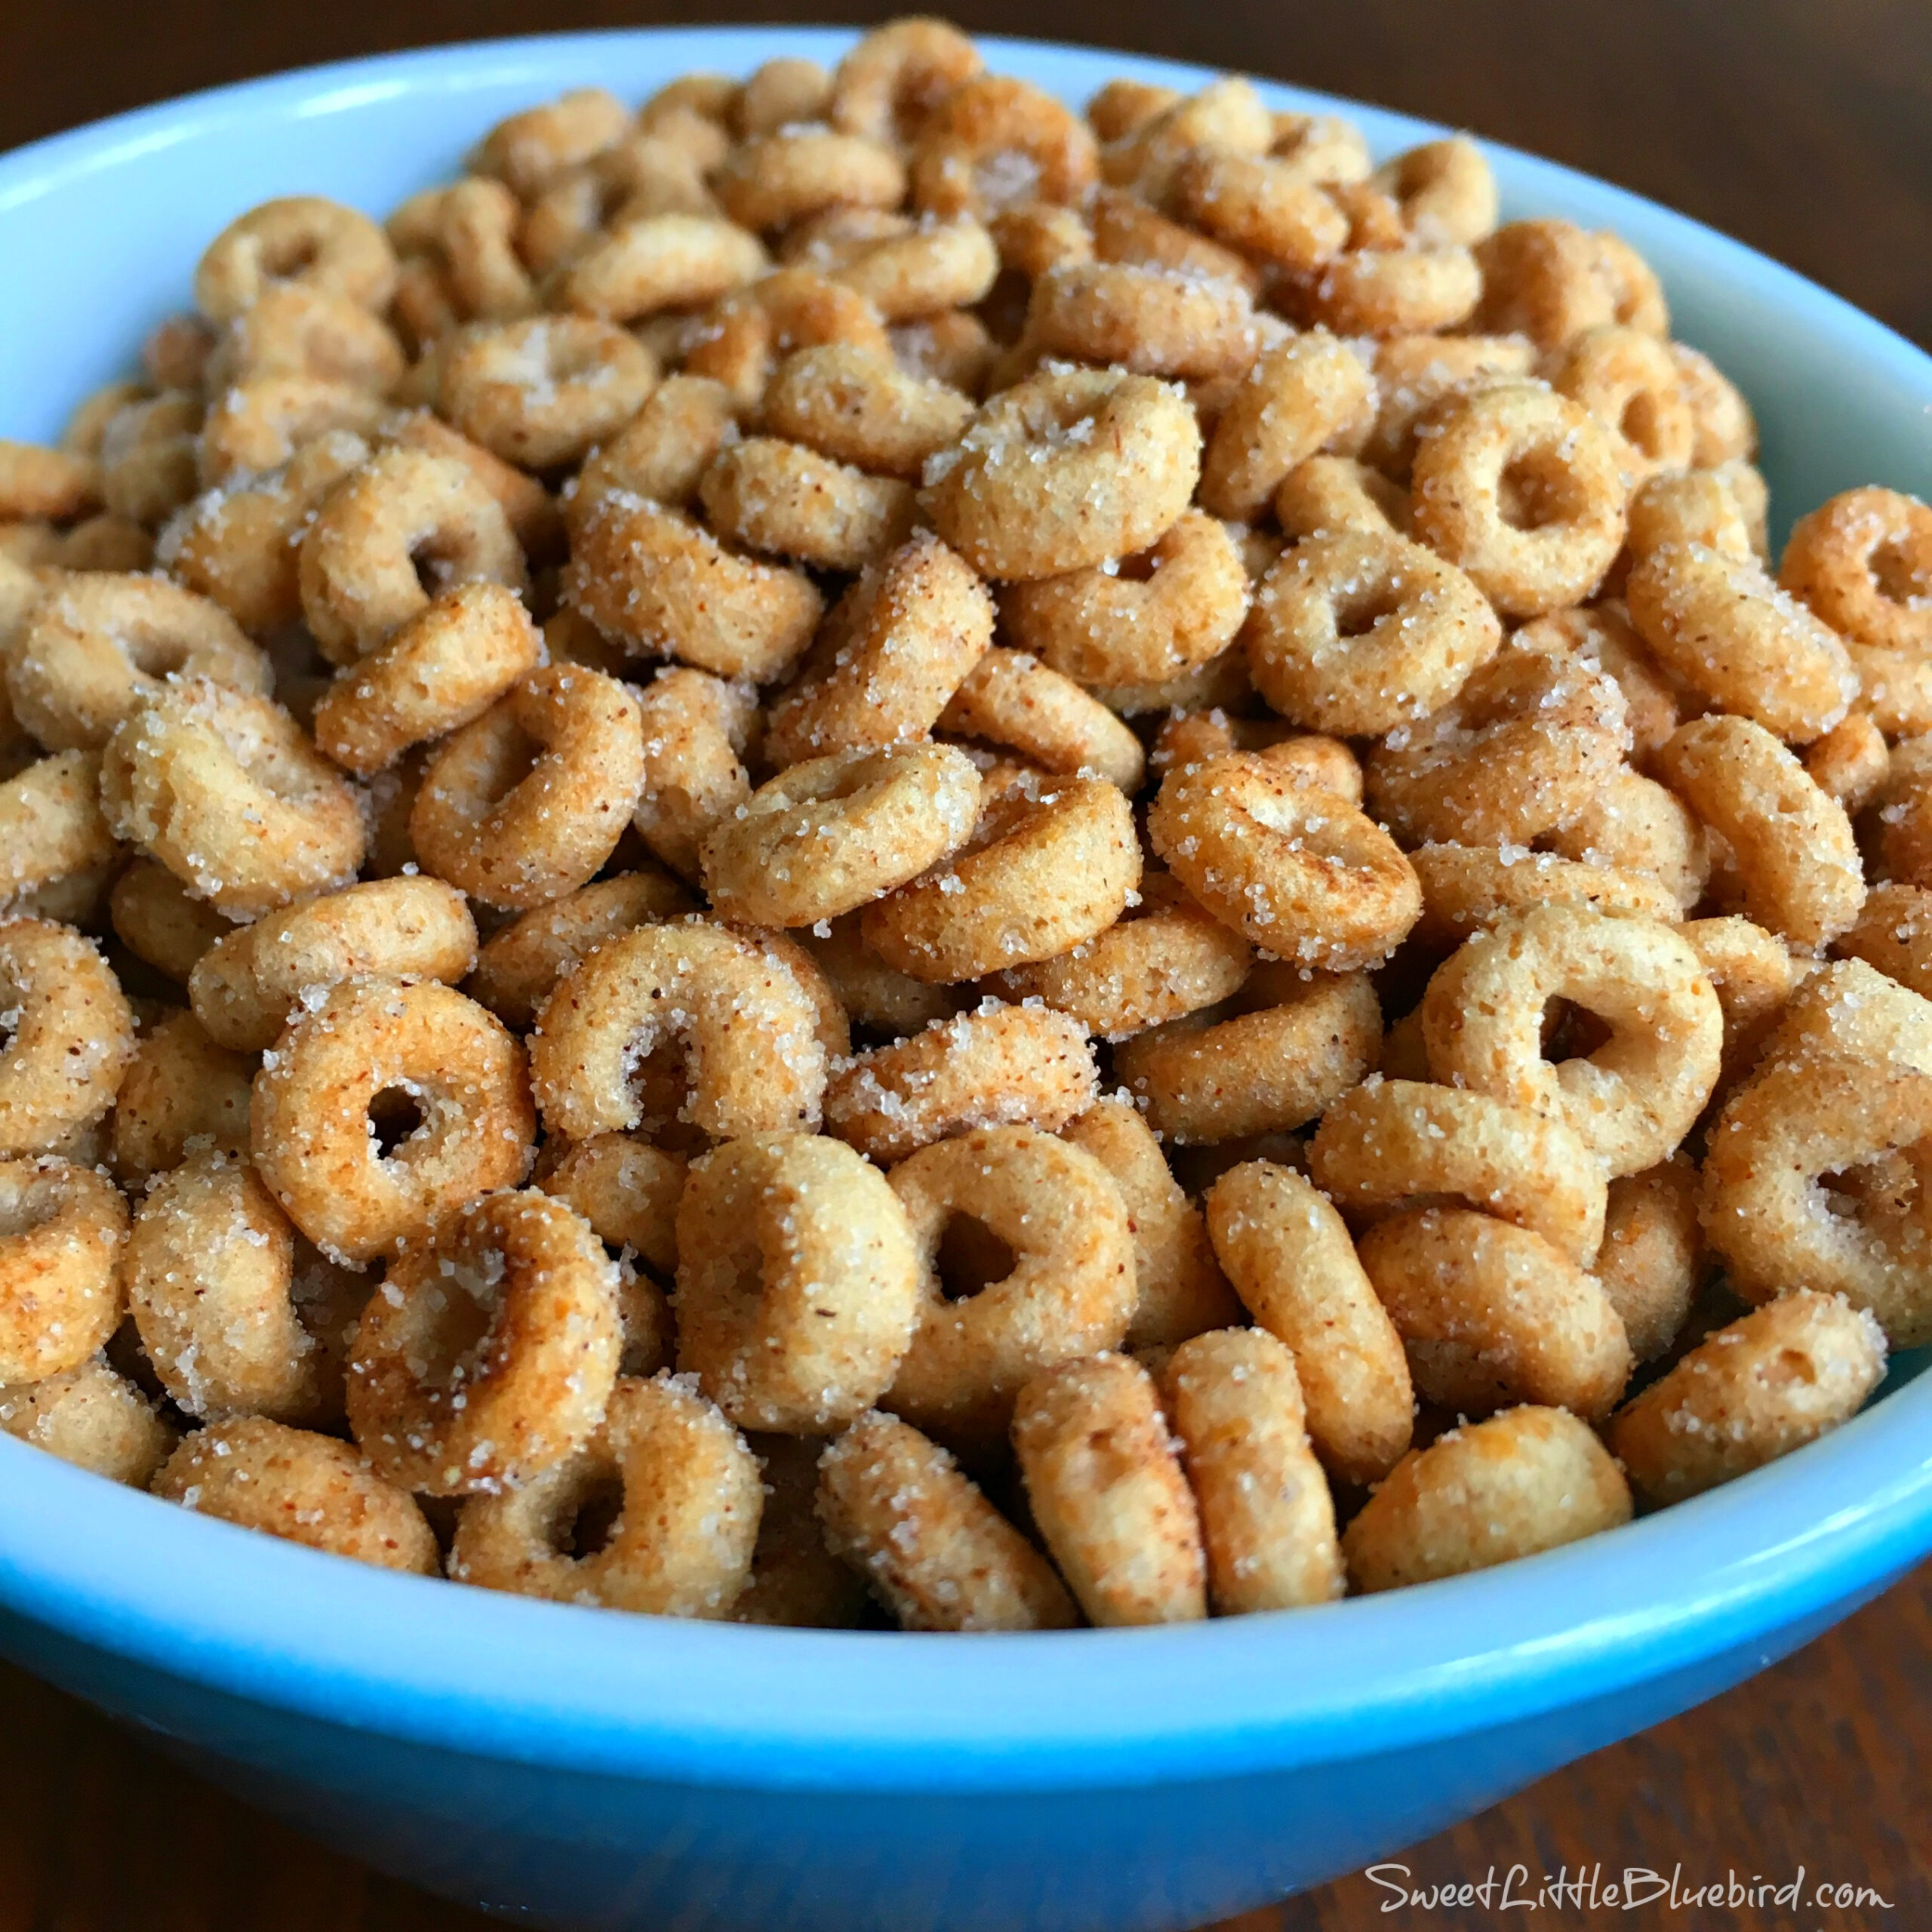 This is a photo of Mini Doughnut Hot Buttered Cheerios served in a blue bowl. 